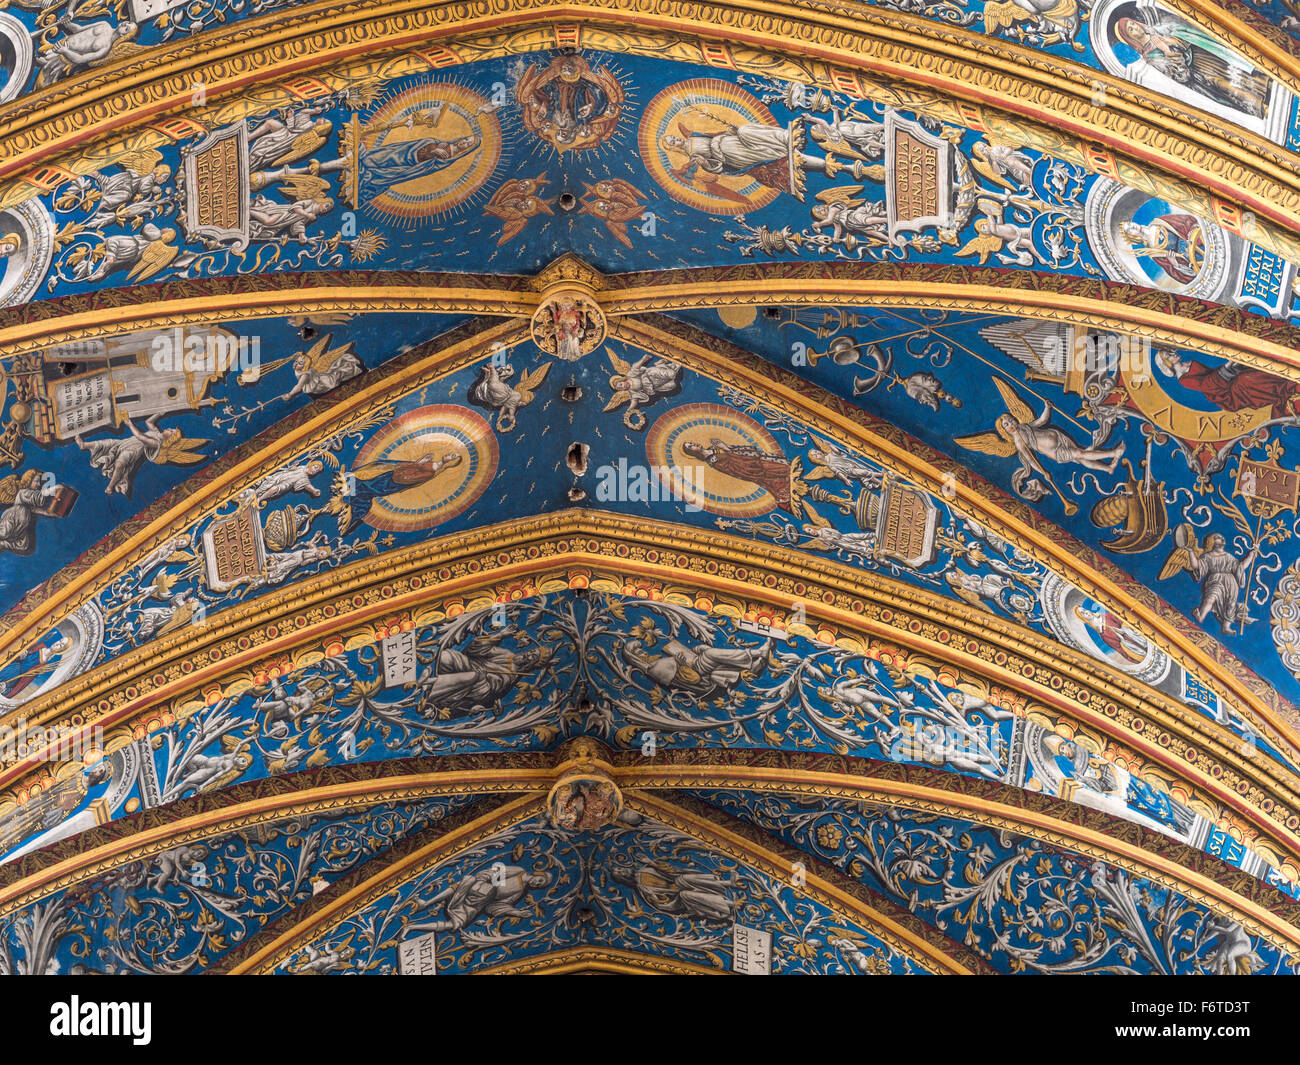 Detail of St Cecil Cathedral Ceiling. The ornate decorations in blue and gold cover the ceiling of the Cathedral. Stock Photo